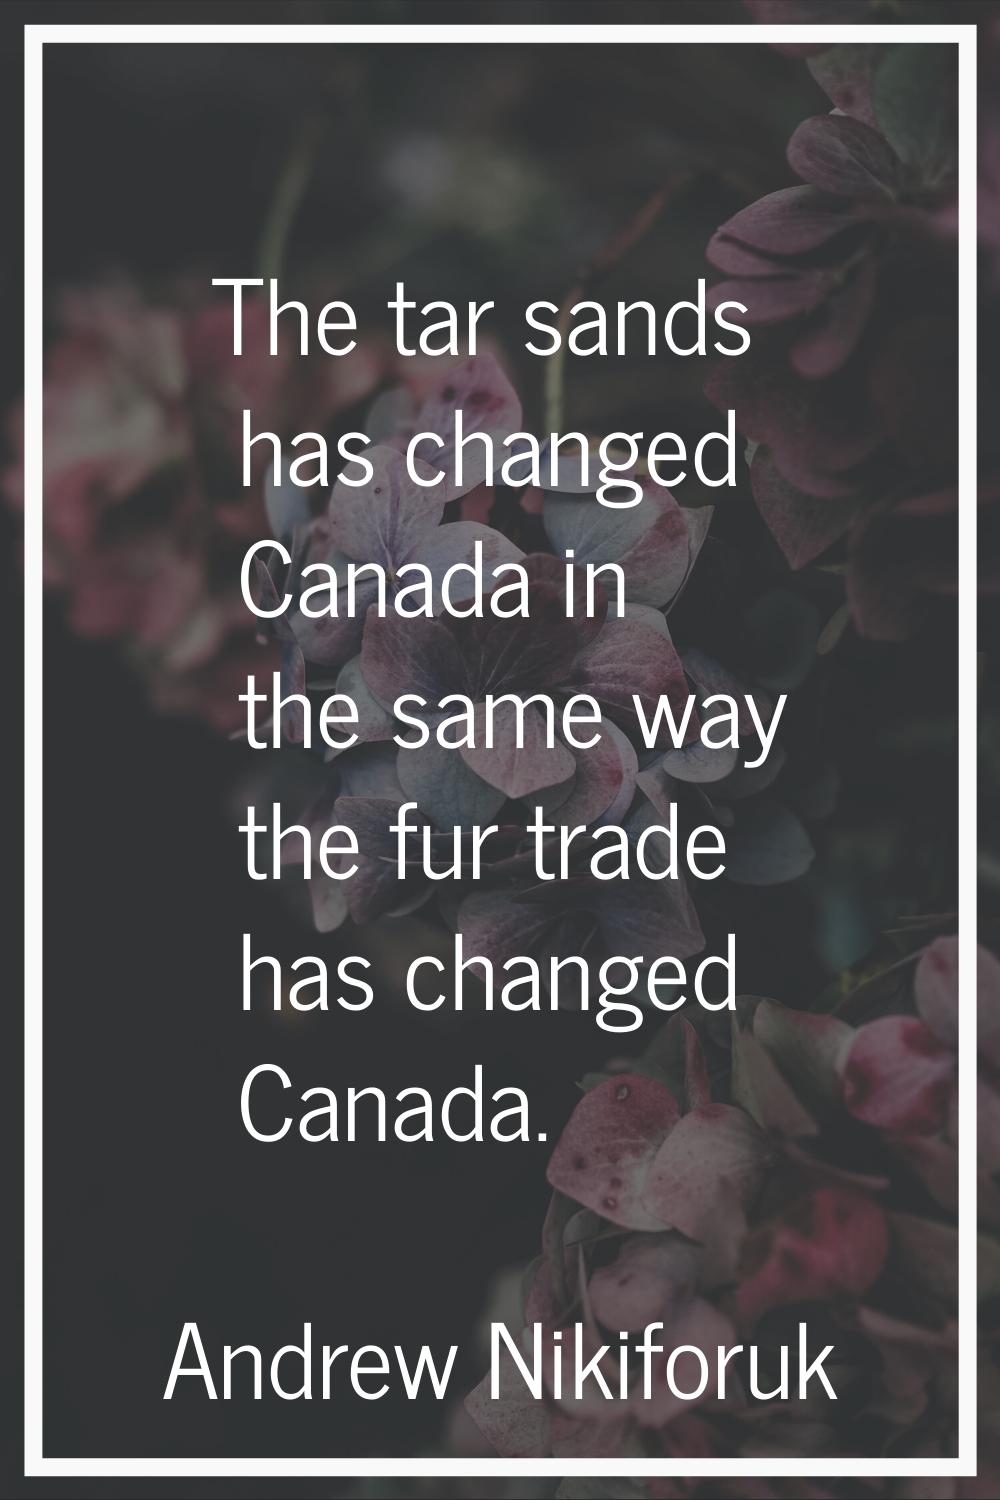 The tar sands has changed Canada in the same way the fur trade has changed Canada.